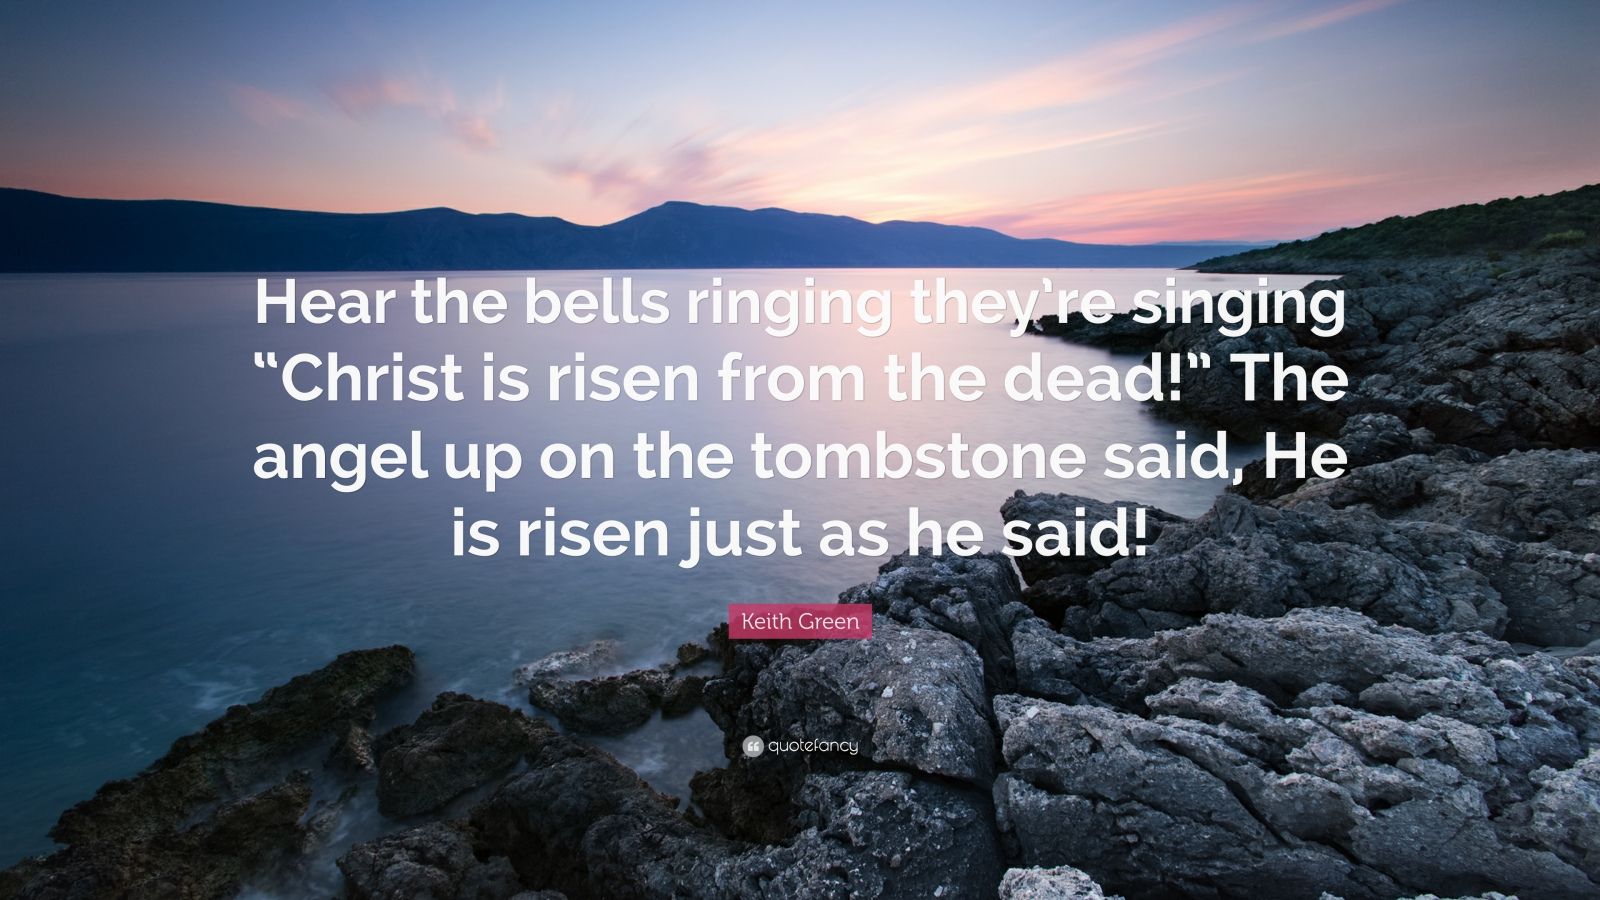 Keith Green Quote: “Hear the bells ringing they’re singing “Christ is